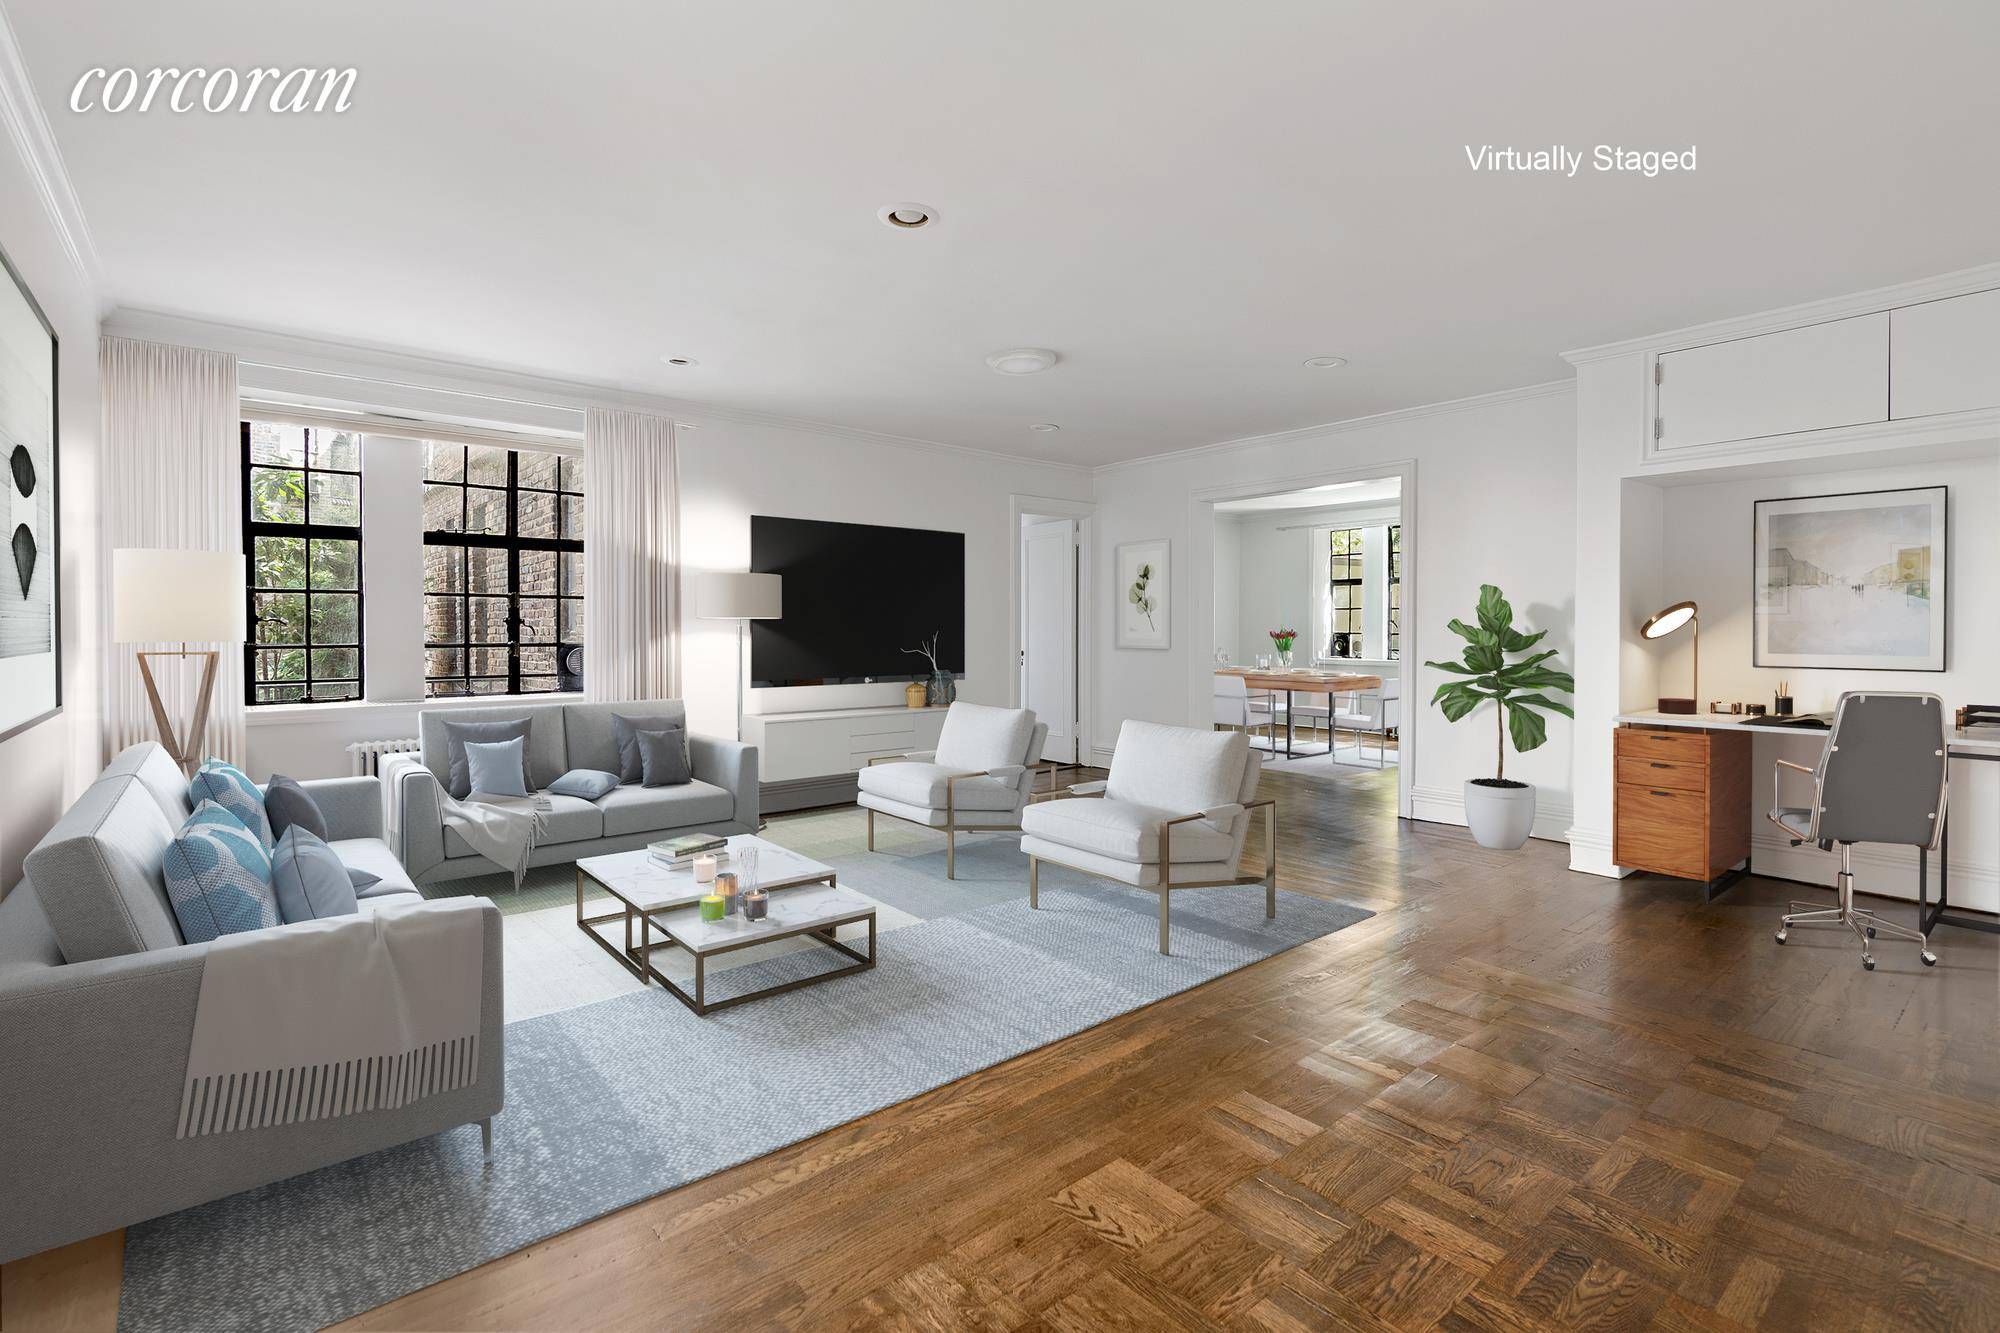 Apt A13 at 116 Pinehurst Avenue is a fairytale hideaway in Upper Manhattan's Hudson Heights that beckons those seeking a balance of city life and serenity, plus great value.